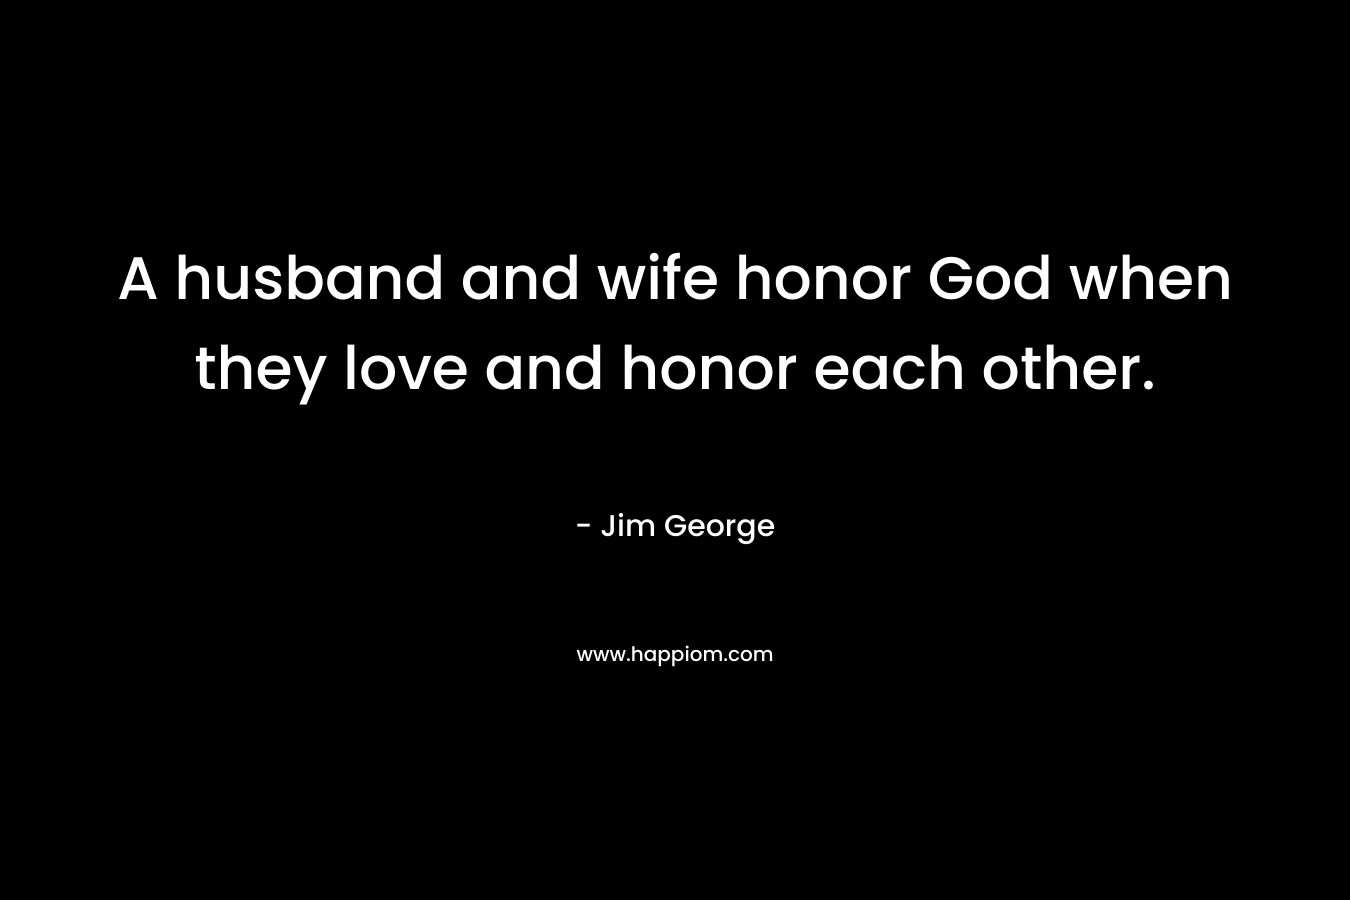 A husband and wife honor God when they love and honor each other.